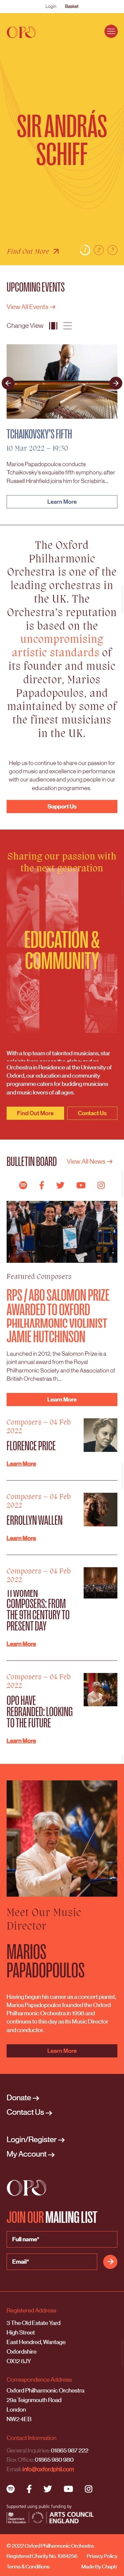 Oxford Philharmonic Orchestra All Winners Colorful